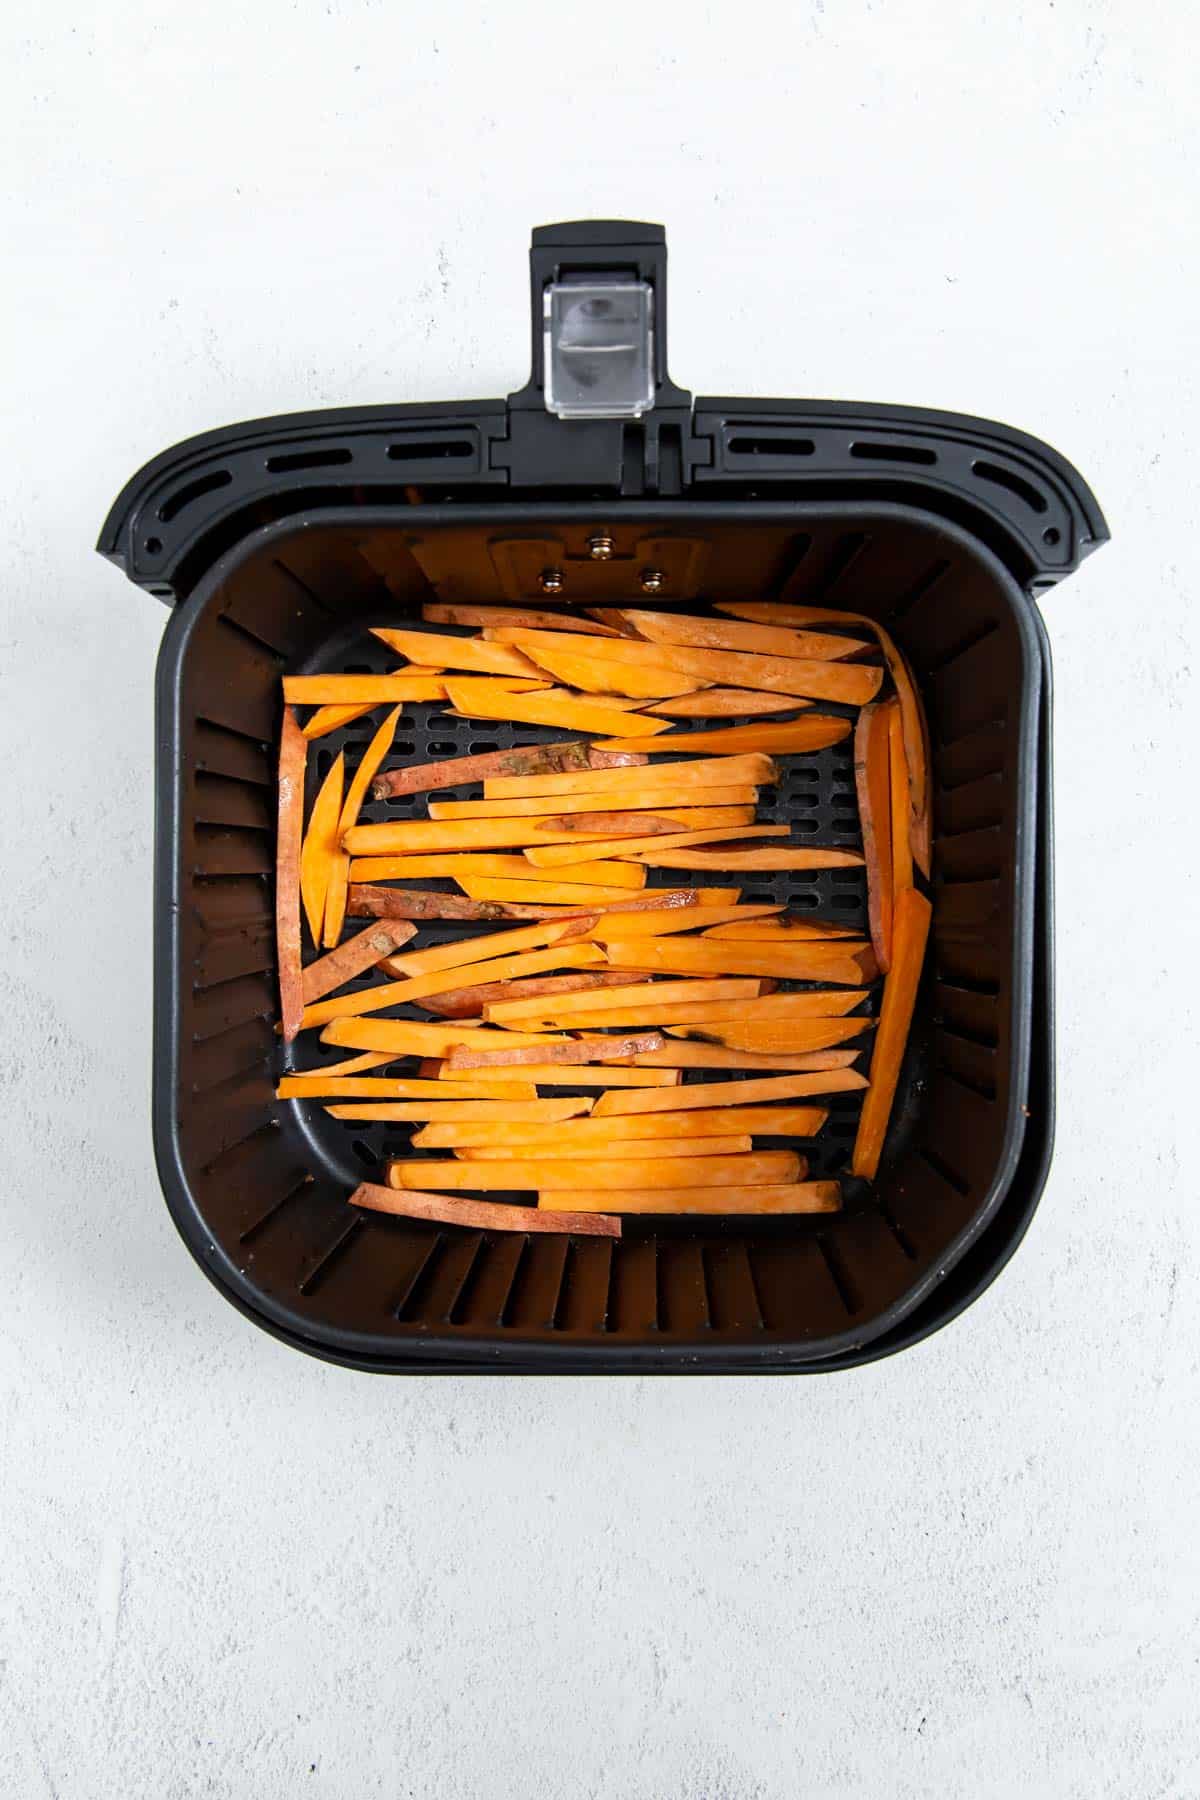 An air fryer filled with sweet potato fries.